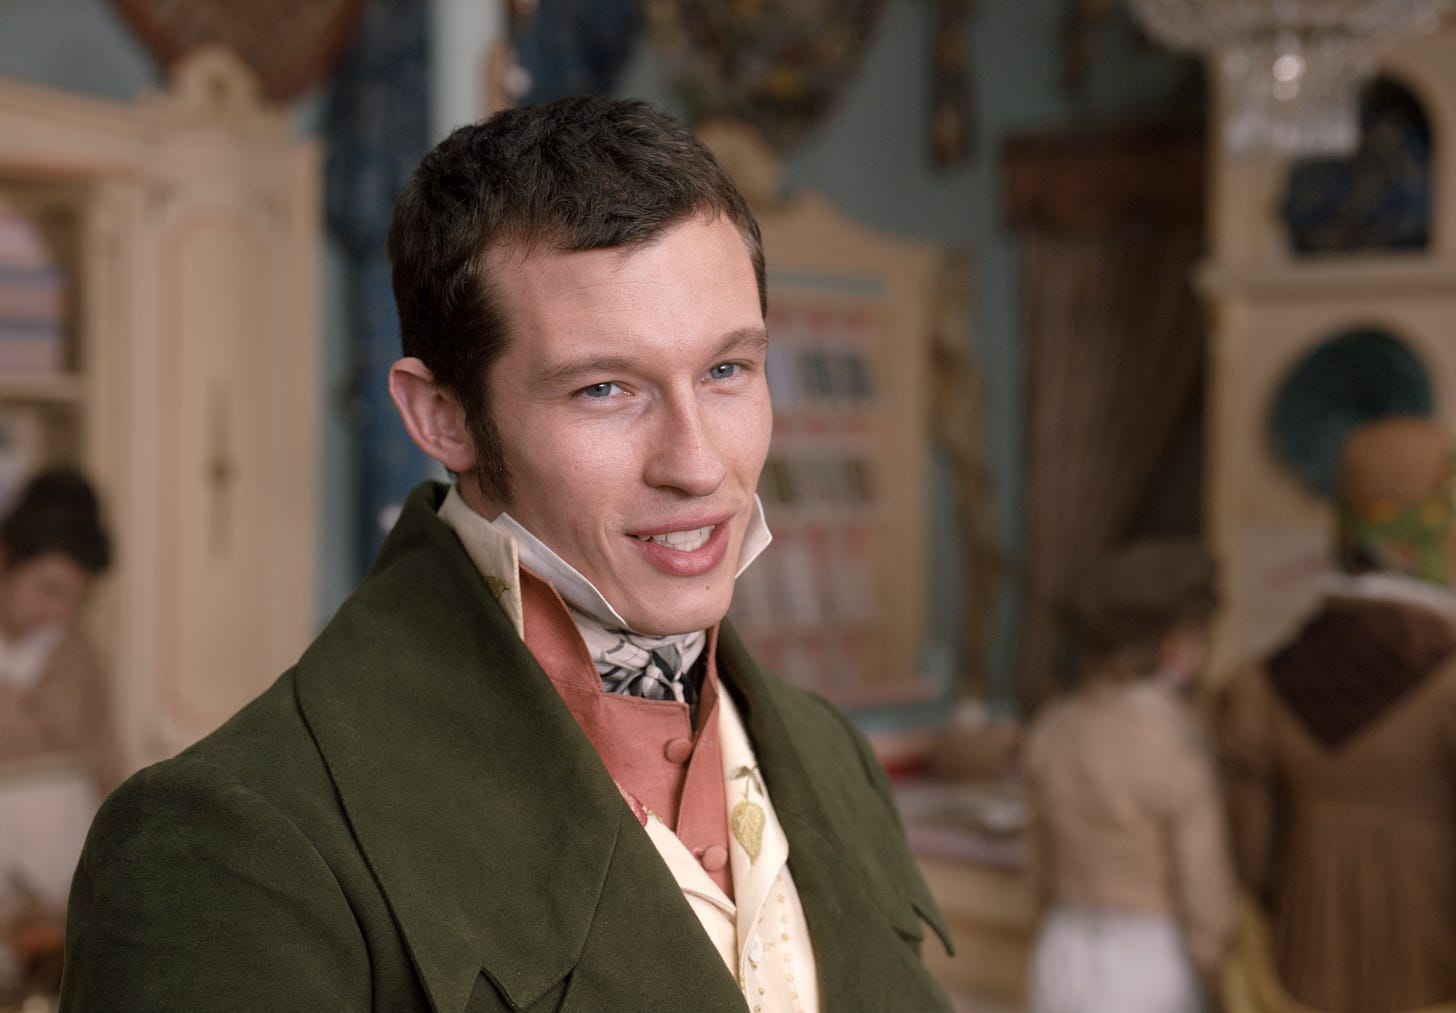 Callum Turner is Frank Churchill in Autumn de Wilde’s 2020 EMMA. Sporting a haircut right out of Adam Smith. In this photo he is seen close up, wearing a smart suit, a cravat, and sporting a mischievous smile. Charming! 